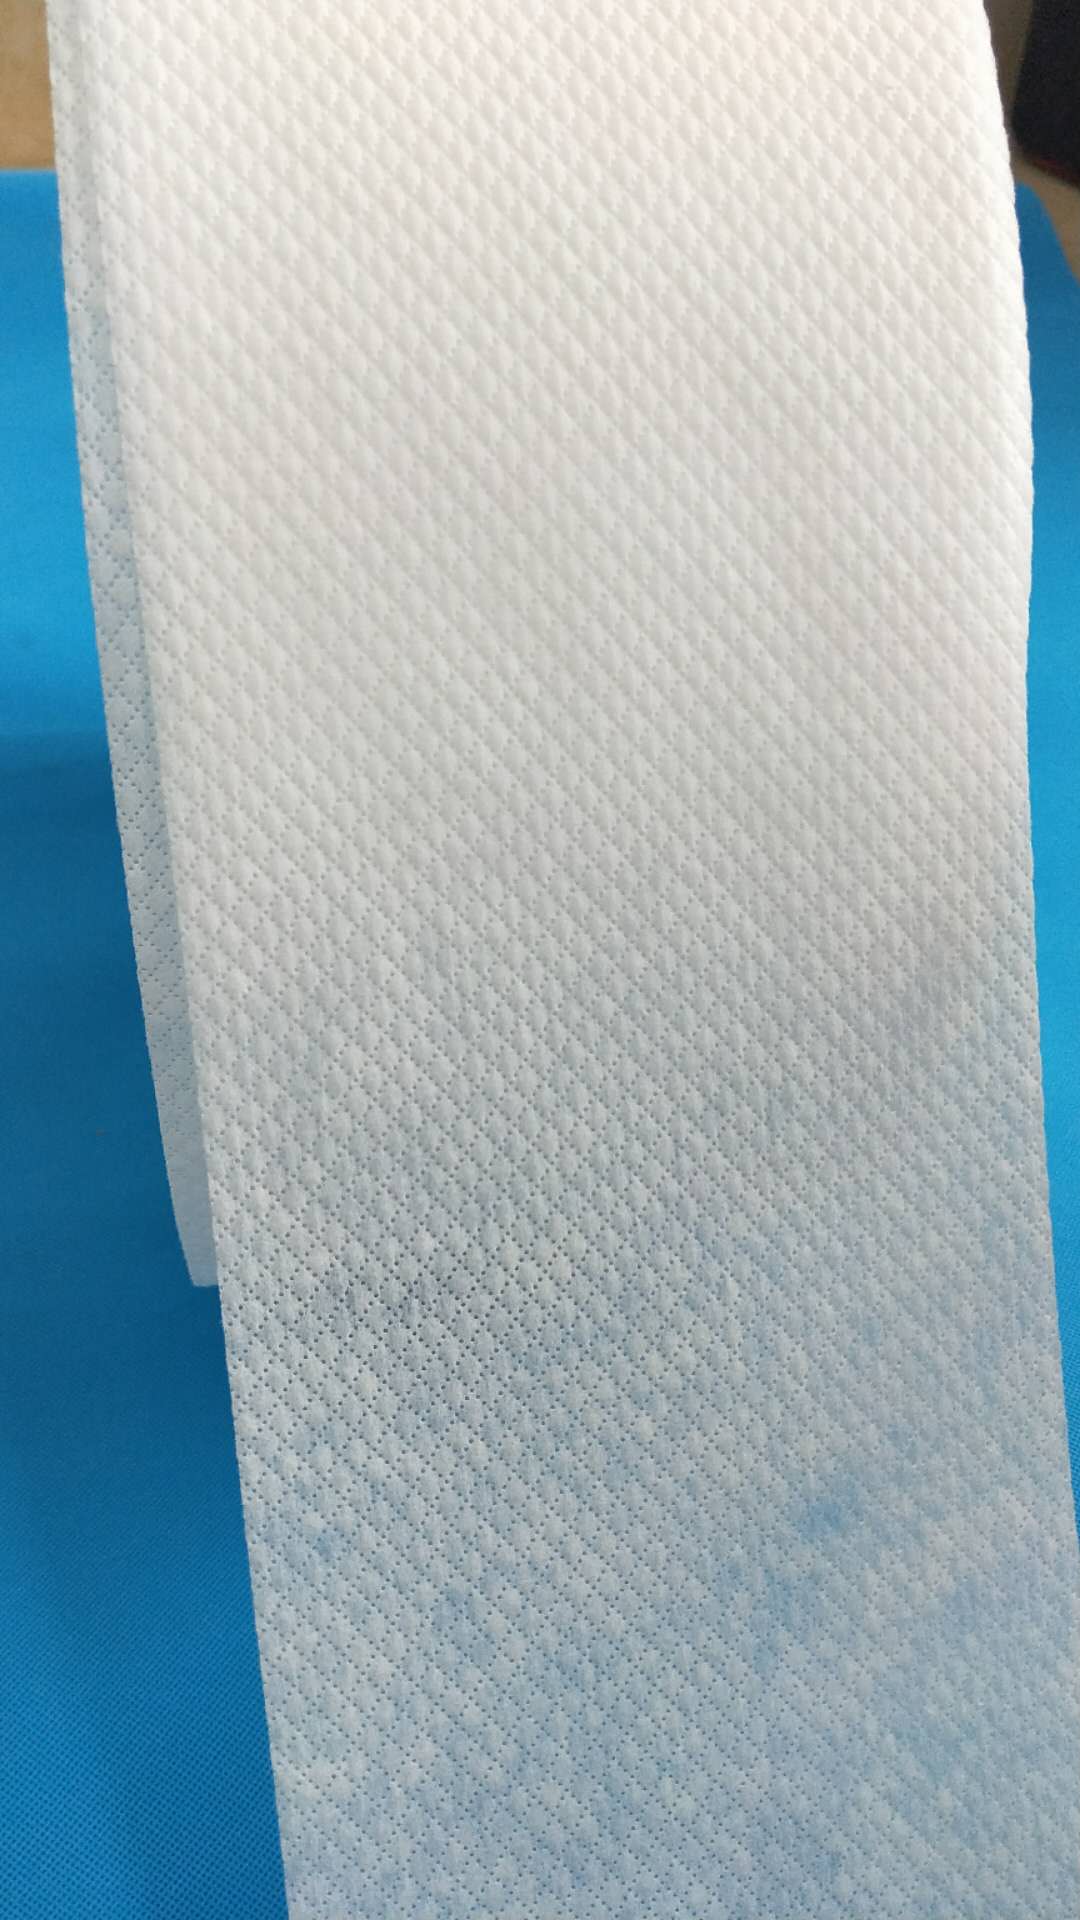 Wholesale 3D Embossing Rhombus Dot Double Layer Hydrophilic Hot Air Hydrophilic Nonwoven for Diaper/Sanitary Napkins (YS-03)